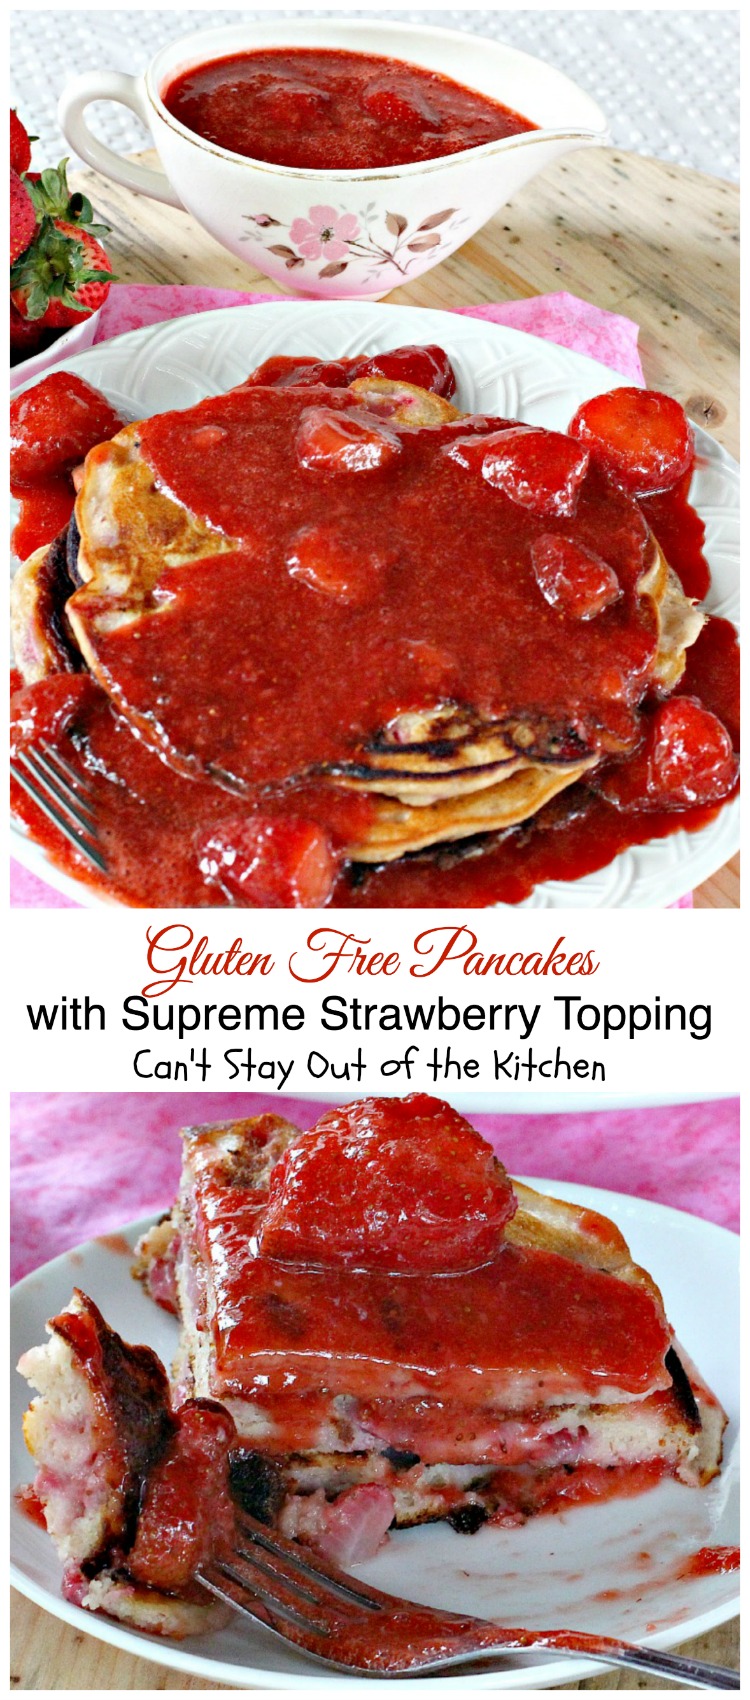 Gluten Free Pancakes with Supreme Strawberry Topping | Can't Stay Out of the KitchenGluten Free Pancakes with Supreme Strawberry Topping | Can't Stay Out of the Kitchen